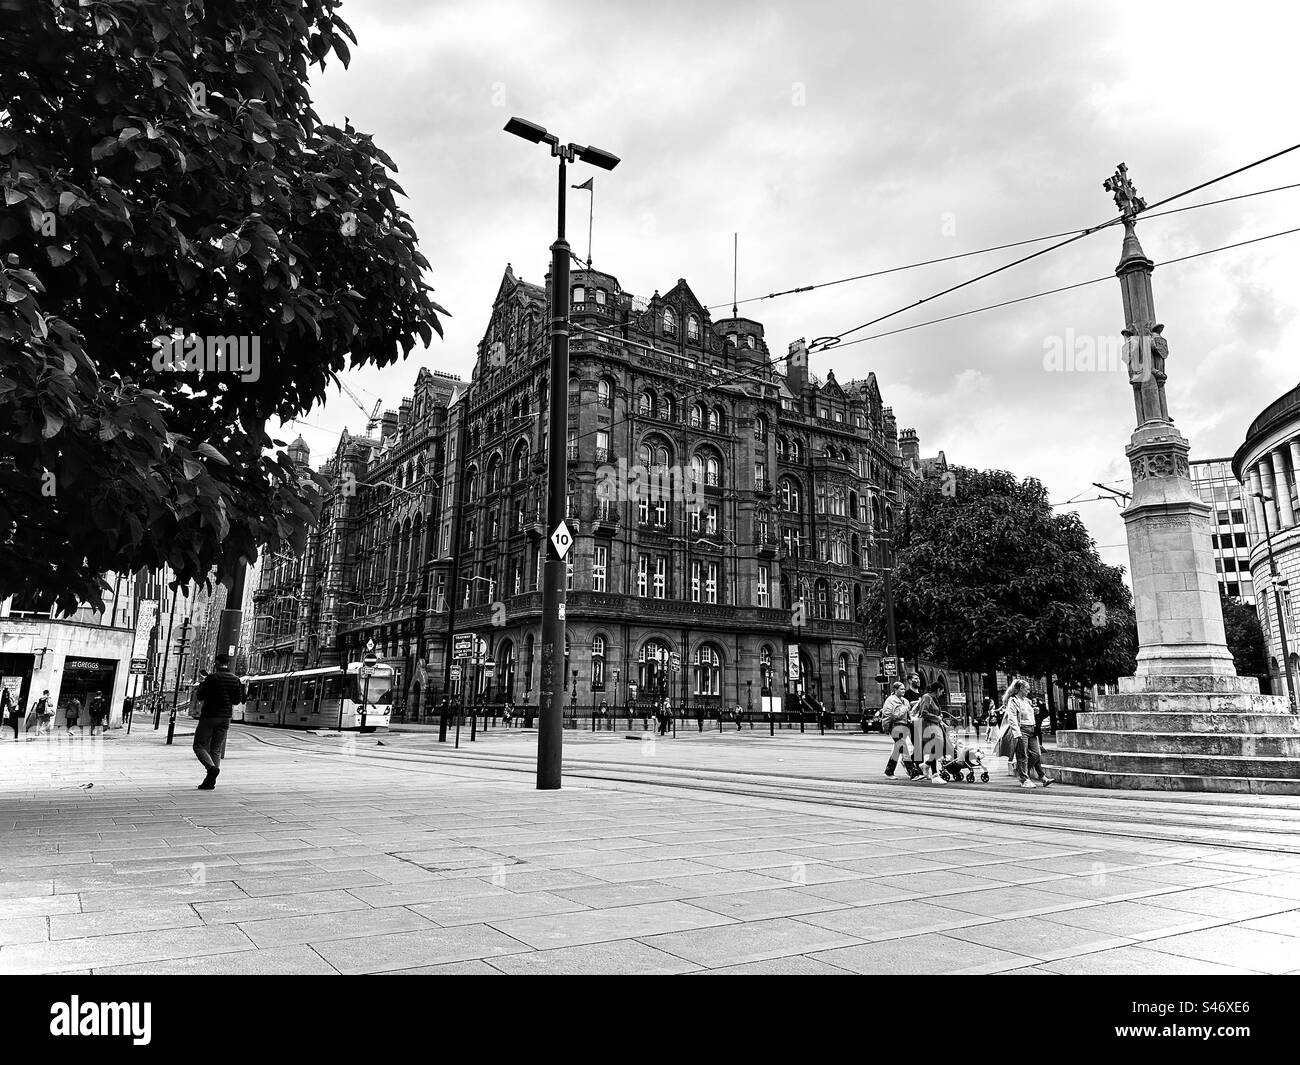 St Peter’s square, Manchester Black and white Stock Photo